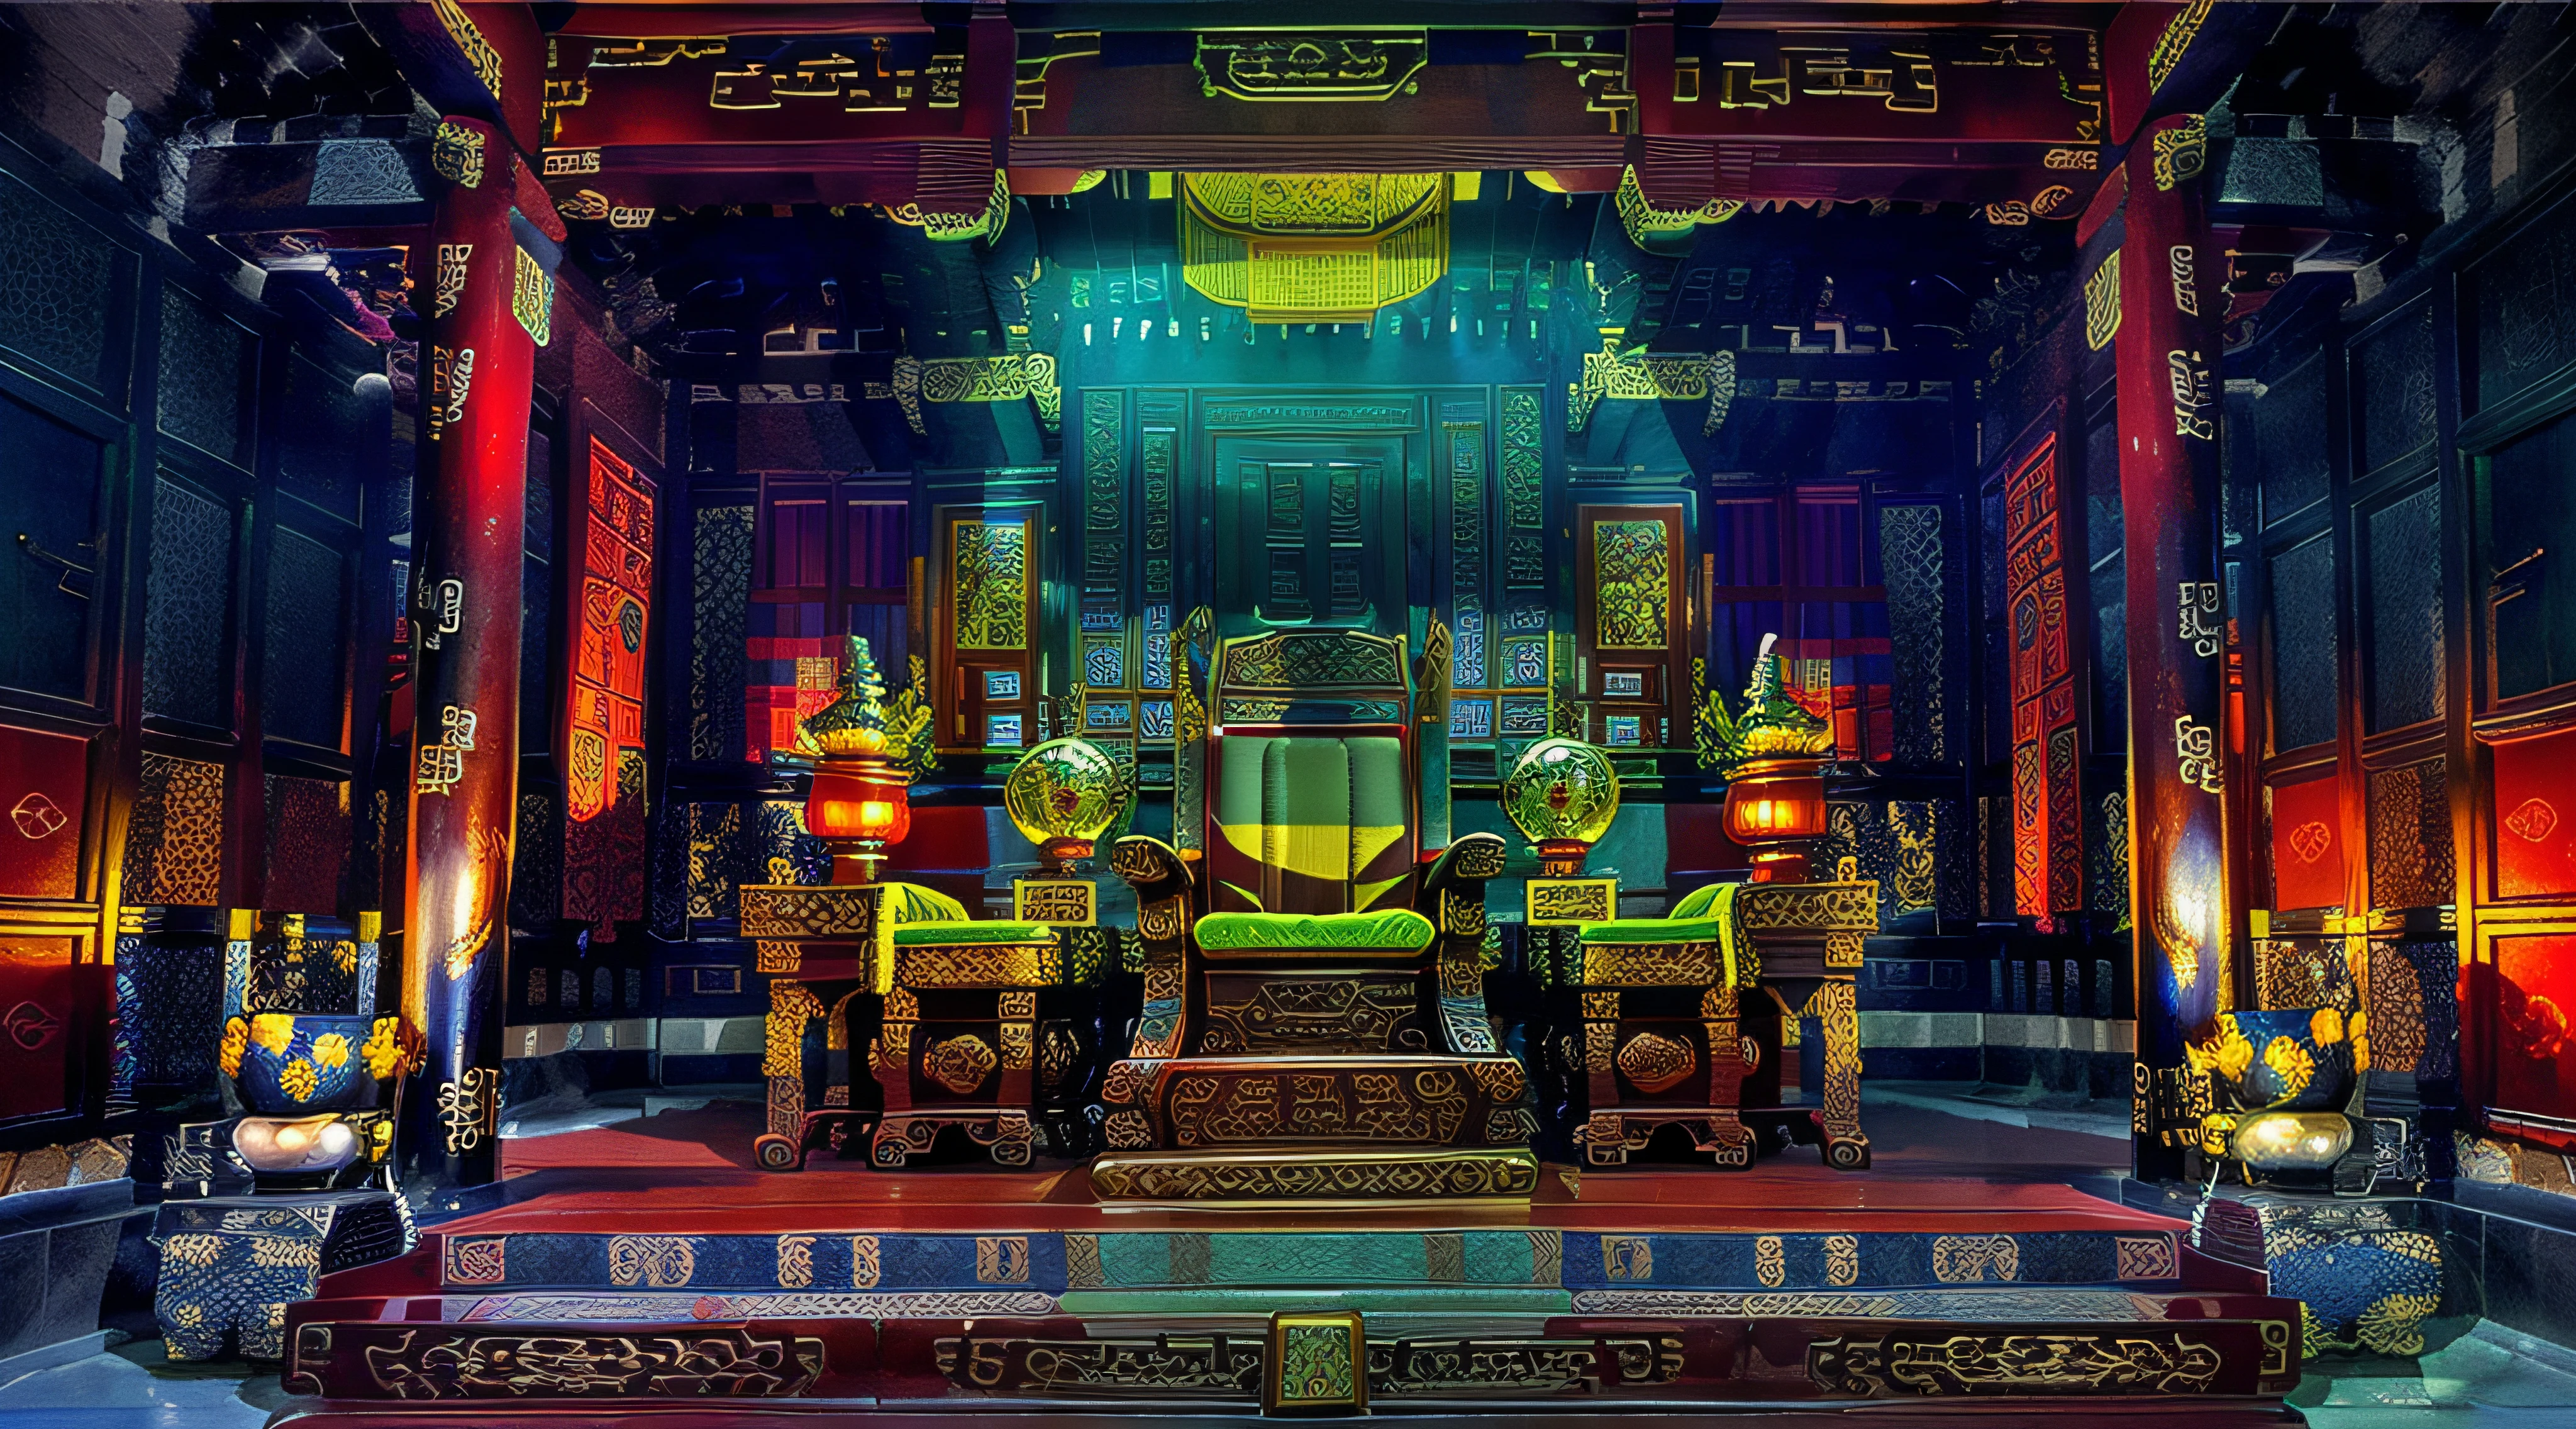 There is a large fountain in a building with a red carpet, Cyberpunk Chinese Ancient Castle, Templo DMT, Sala do Trono, Beautiful Rendering of the Tang Dynasty, Sala do trono primorosamente projetada, Sala do trono decadente, em uma sala do trono, Japanese Cyberpunk Temple, Motivos imperiais brilhantes, arquitetura colorida de warcraft, rustic throne room, Chinese palace, from inside the giant palace